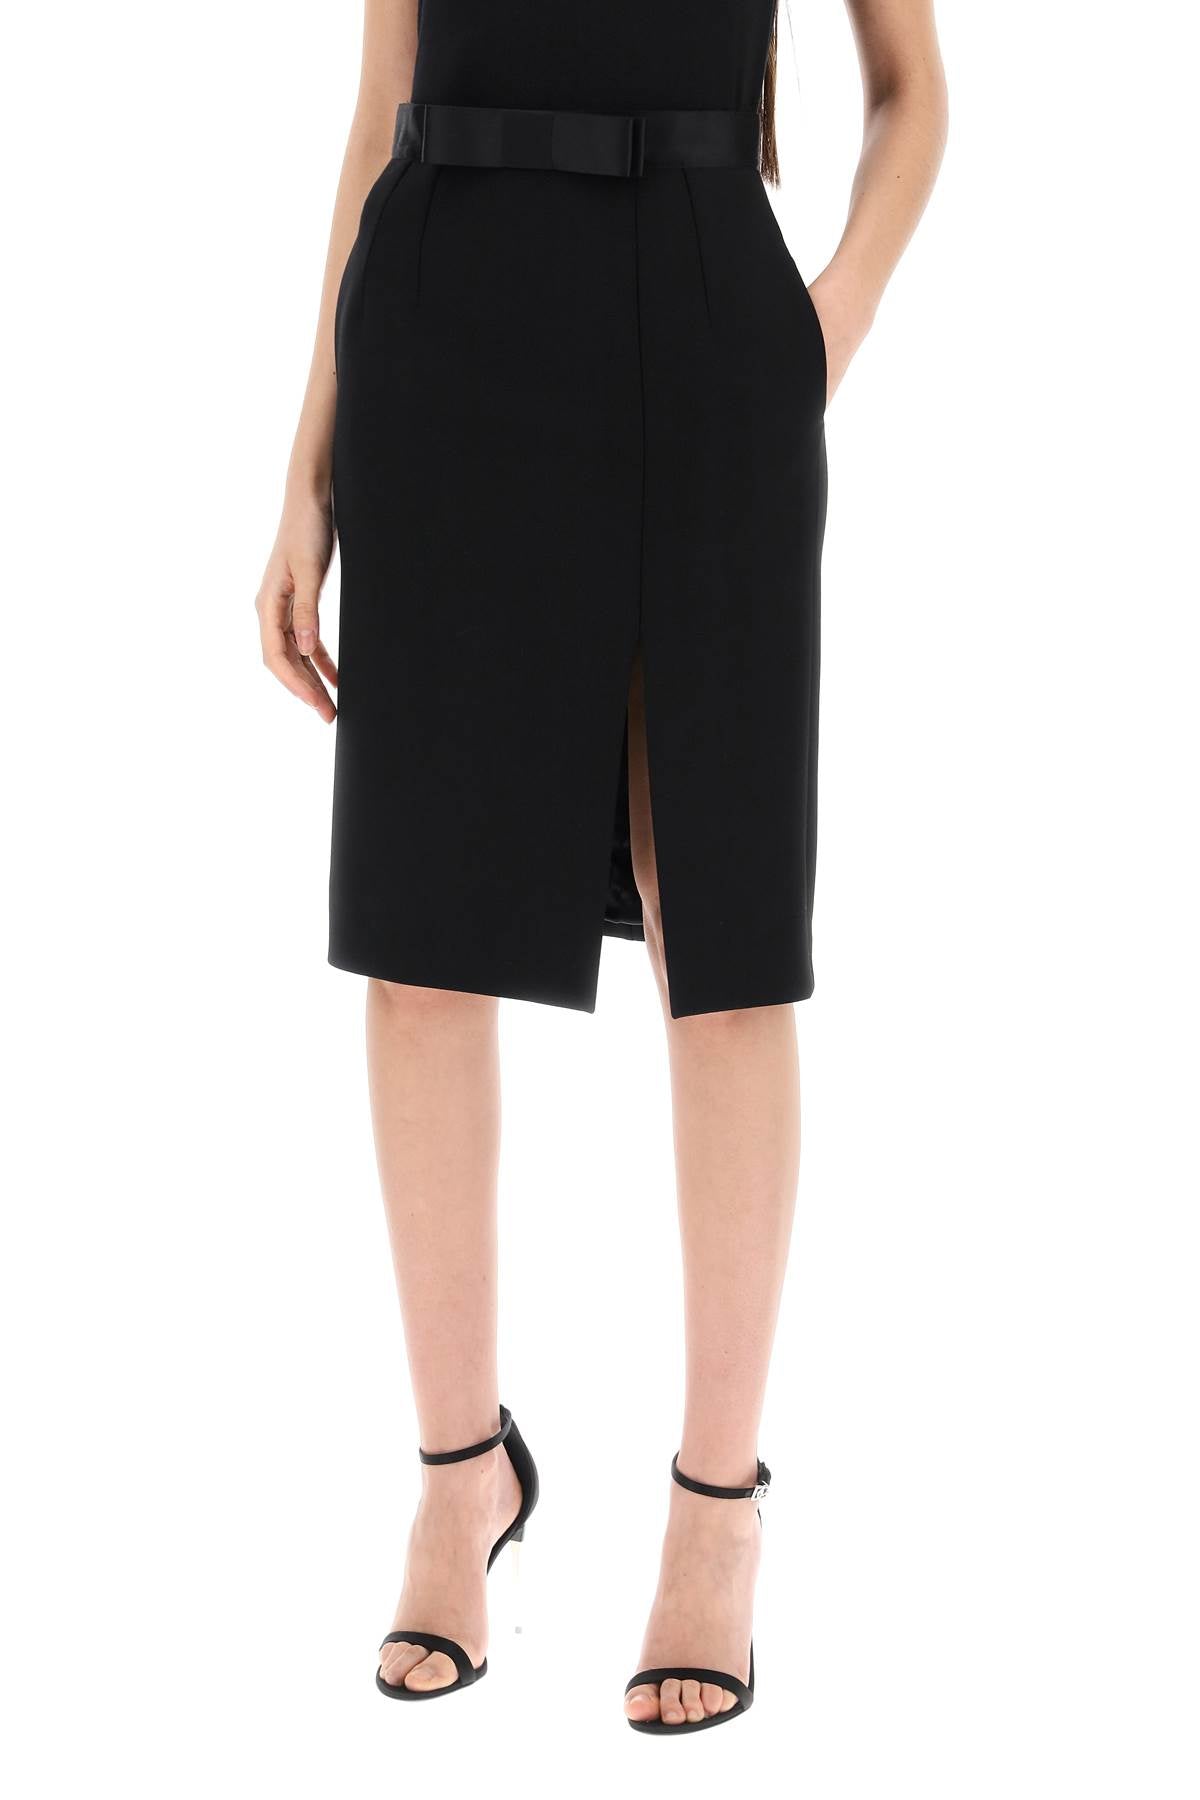 Dolce & Gabbana Replace With Double Quoteknee Length Skirt With Satin   Black